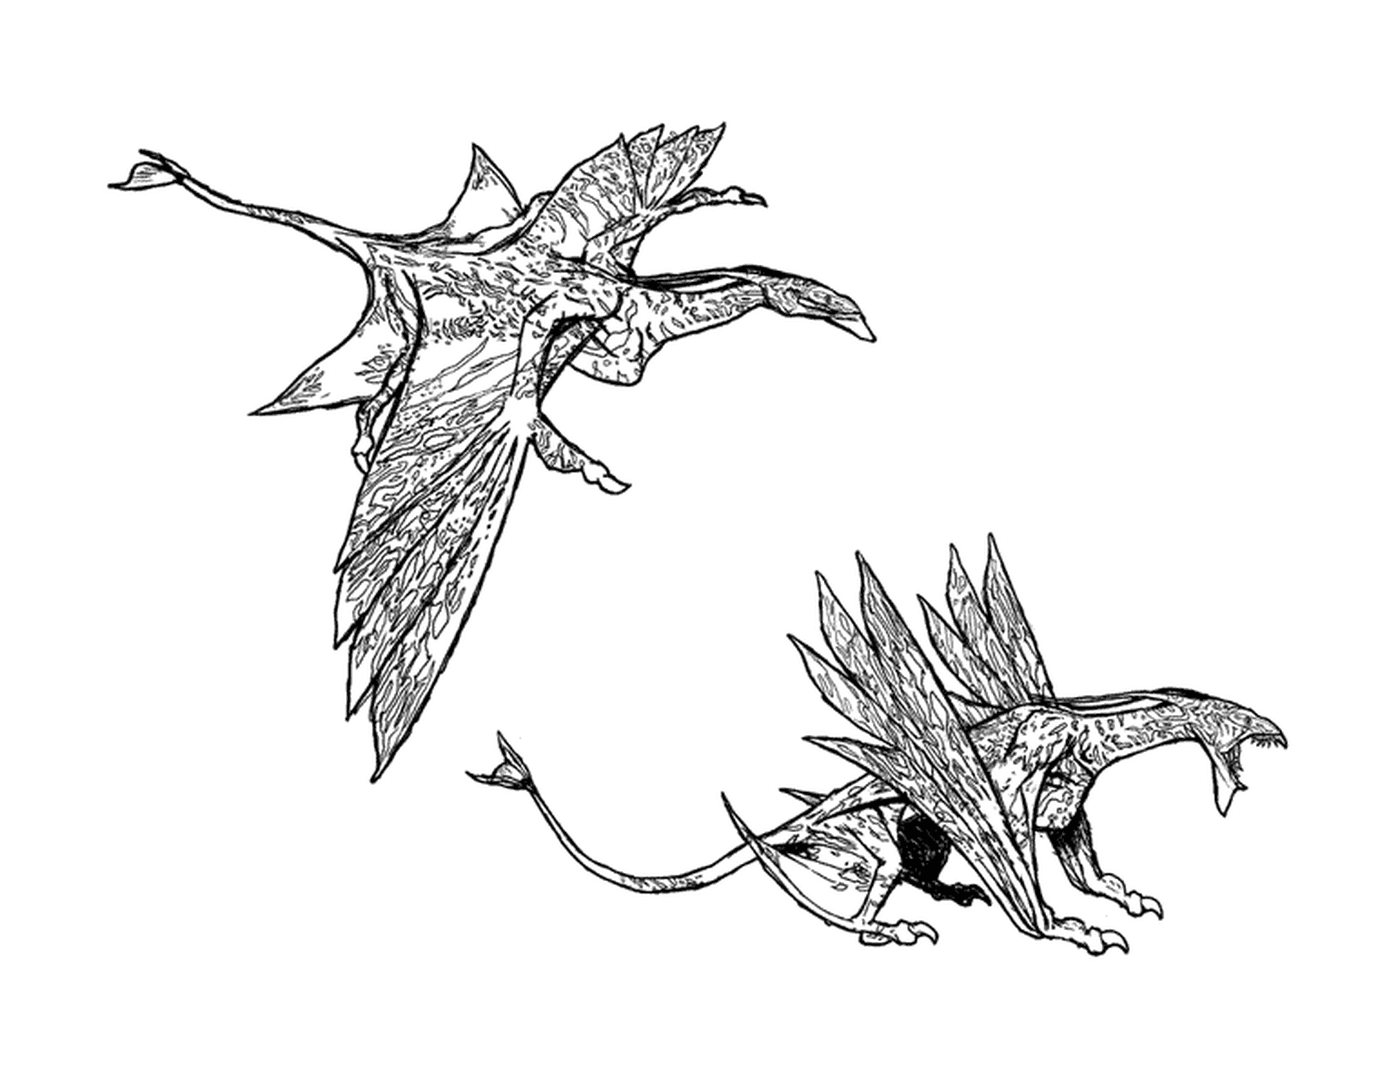  Two drawings of a spread-winged dragon 